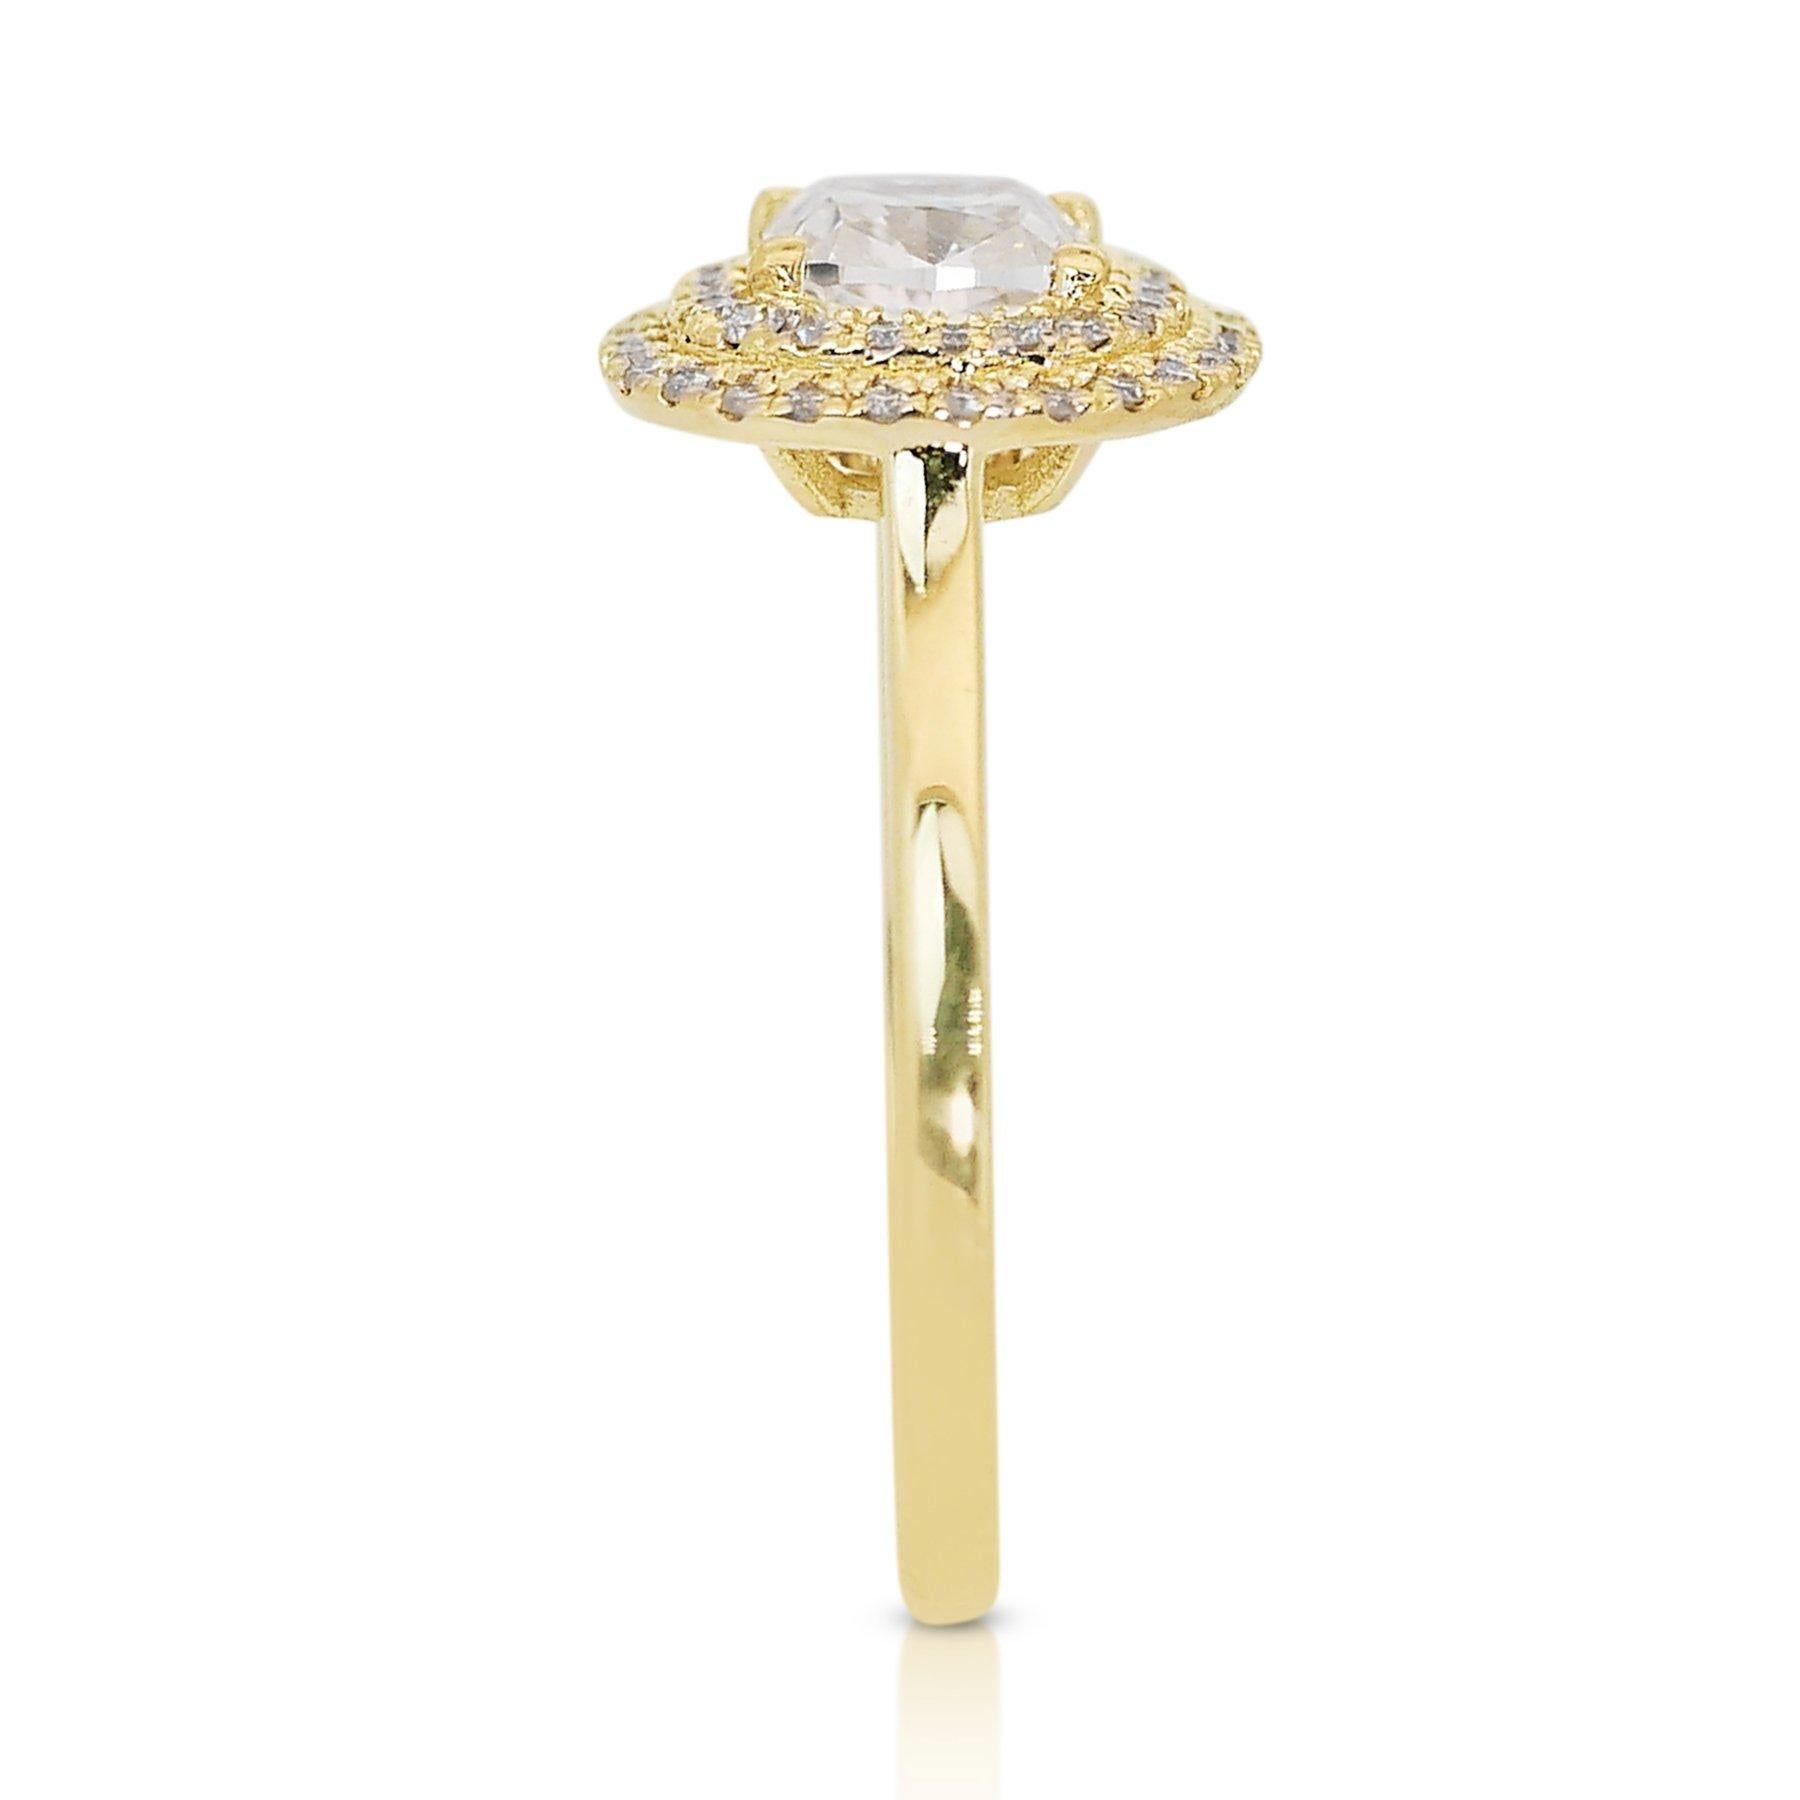 Magnificent 1.22ct Diamond Double Halo Ring in 18k Yellow Gold - GIA Certified For Sale 1